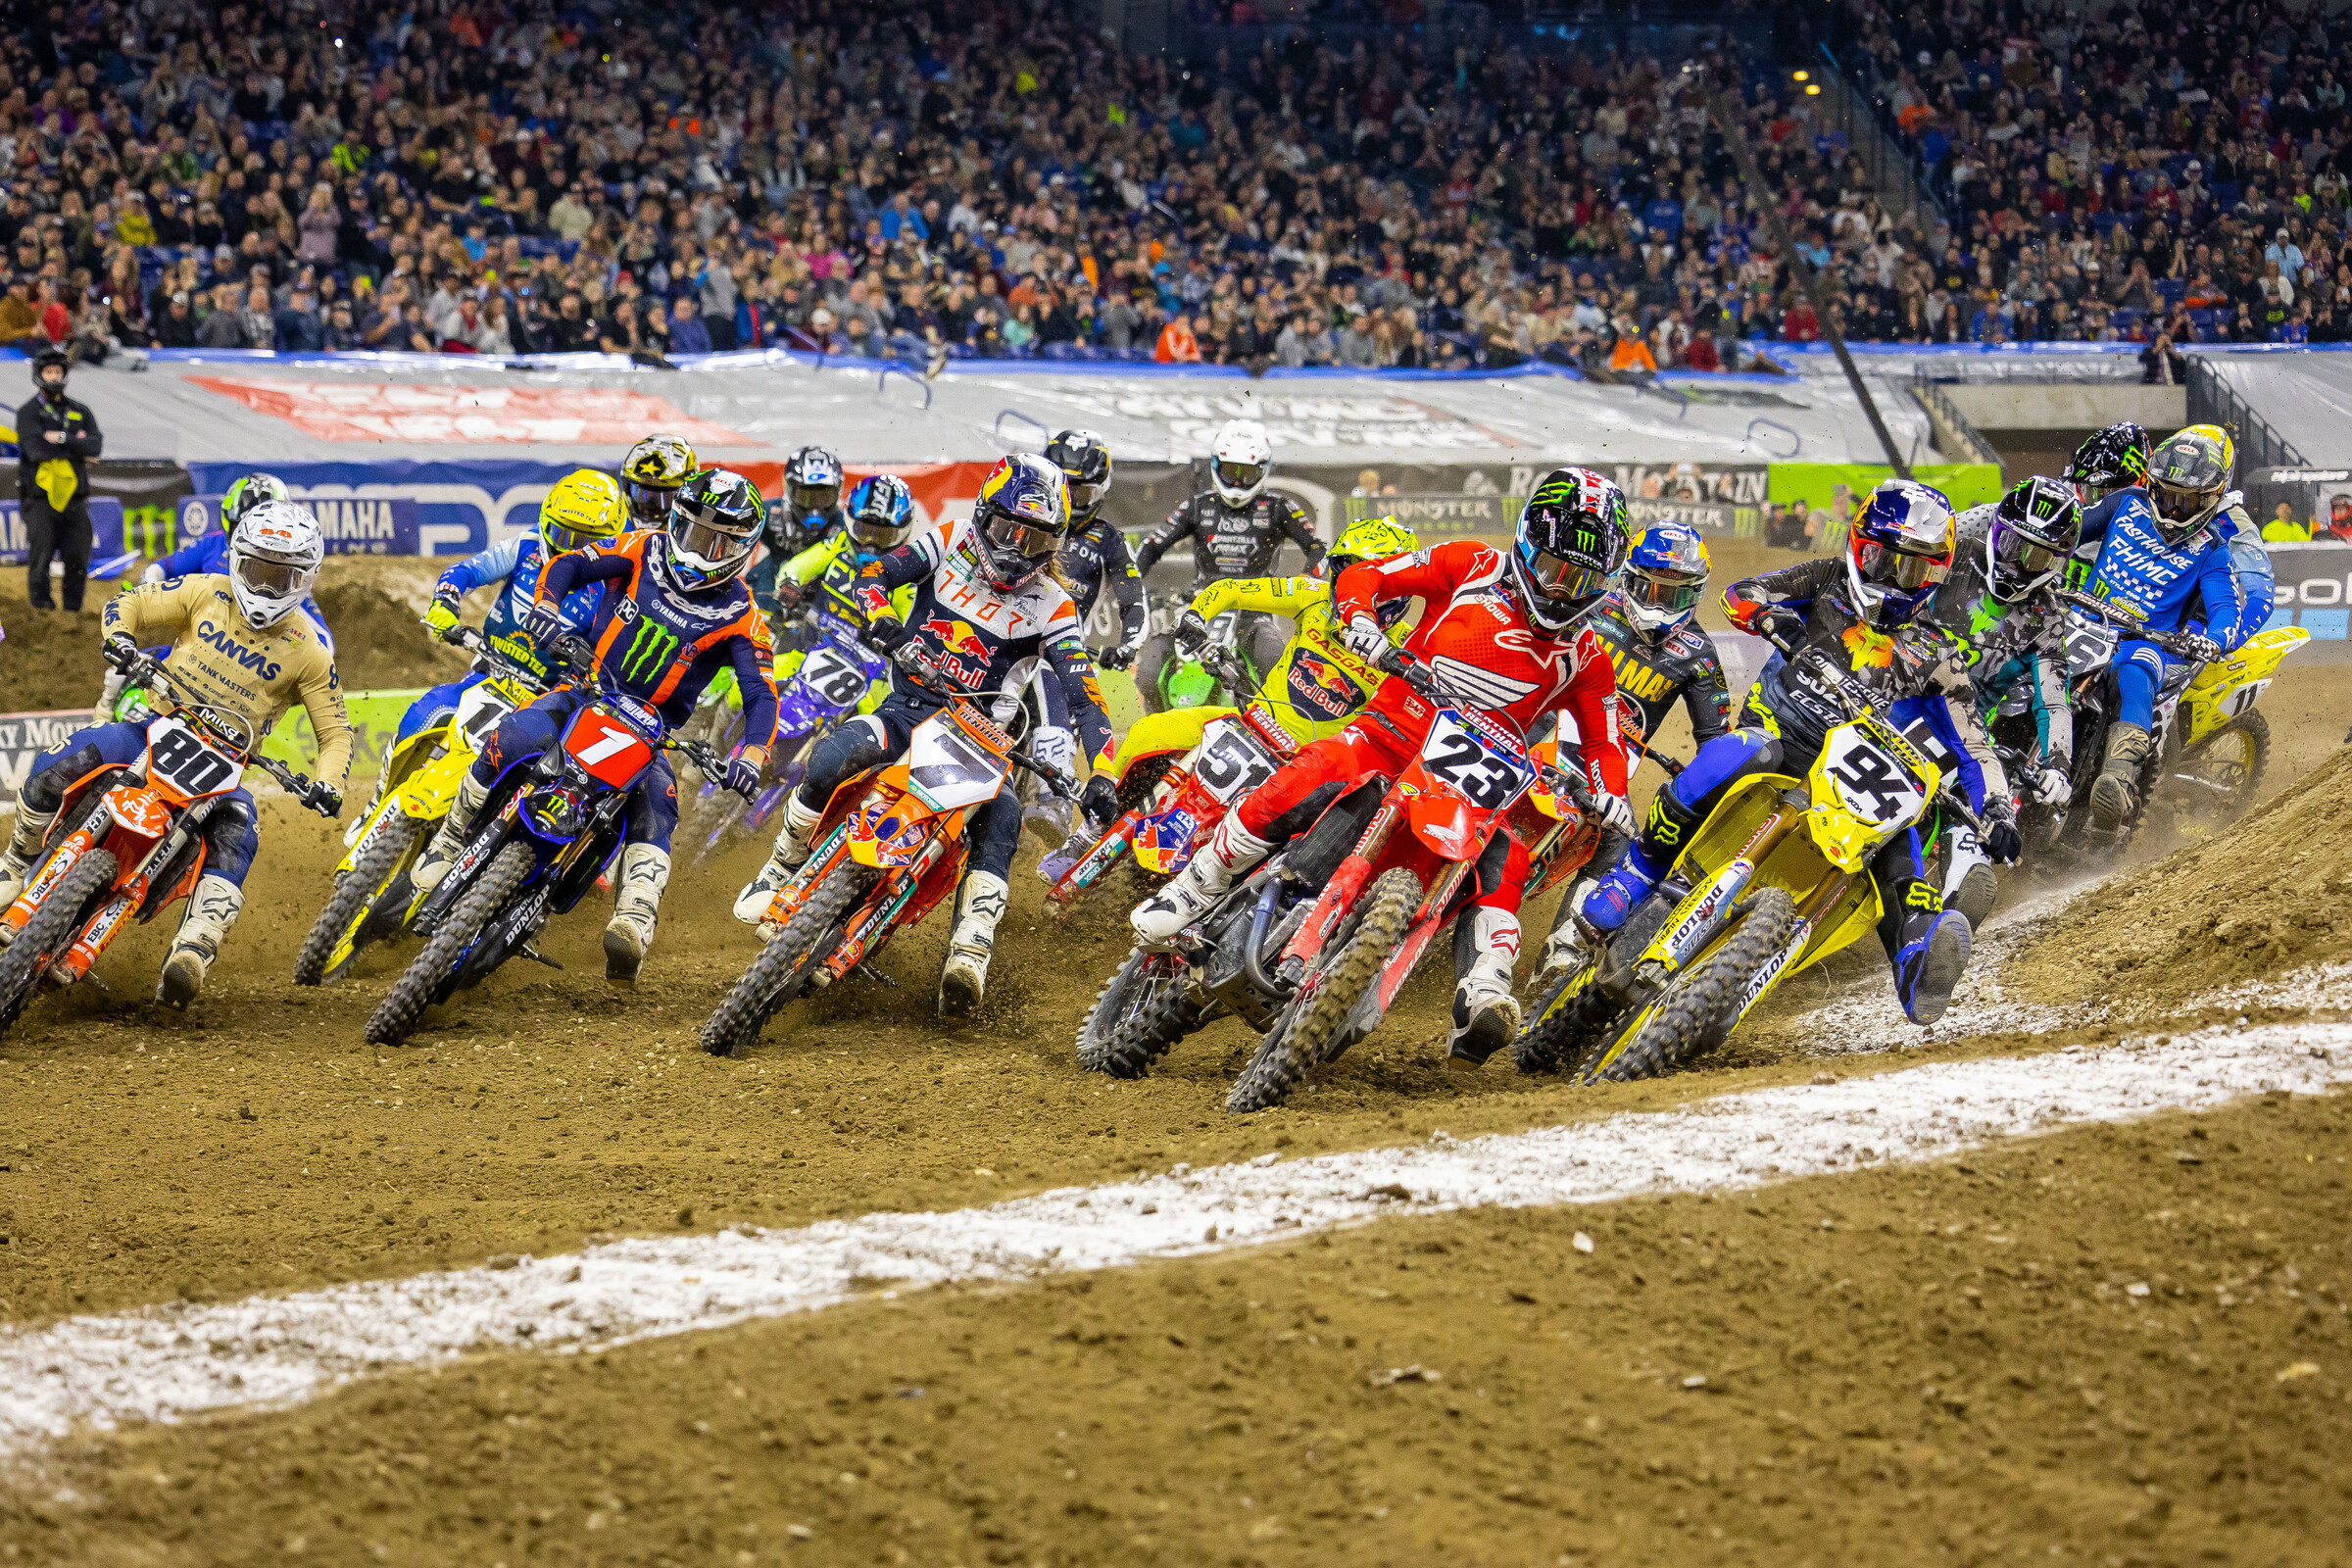 Race Report from the 2023 Indianapolis Supercross